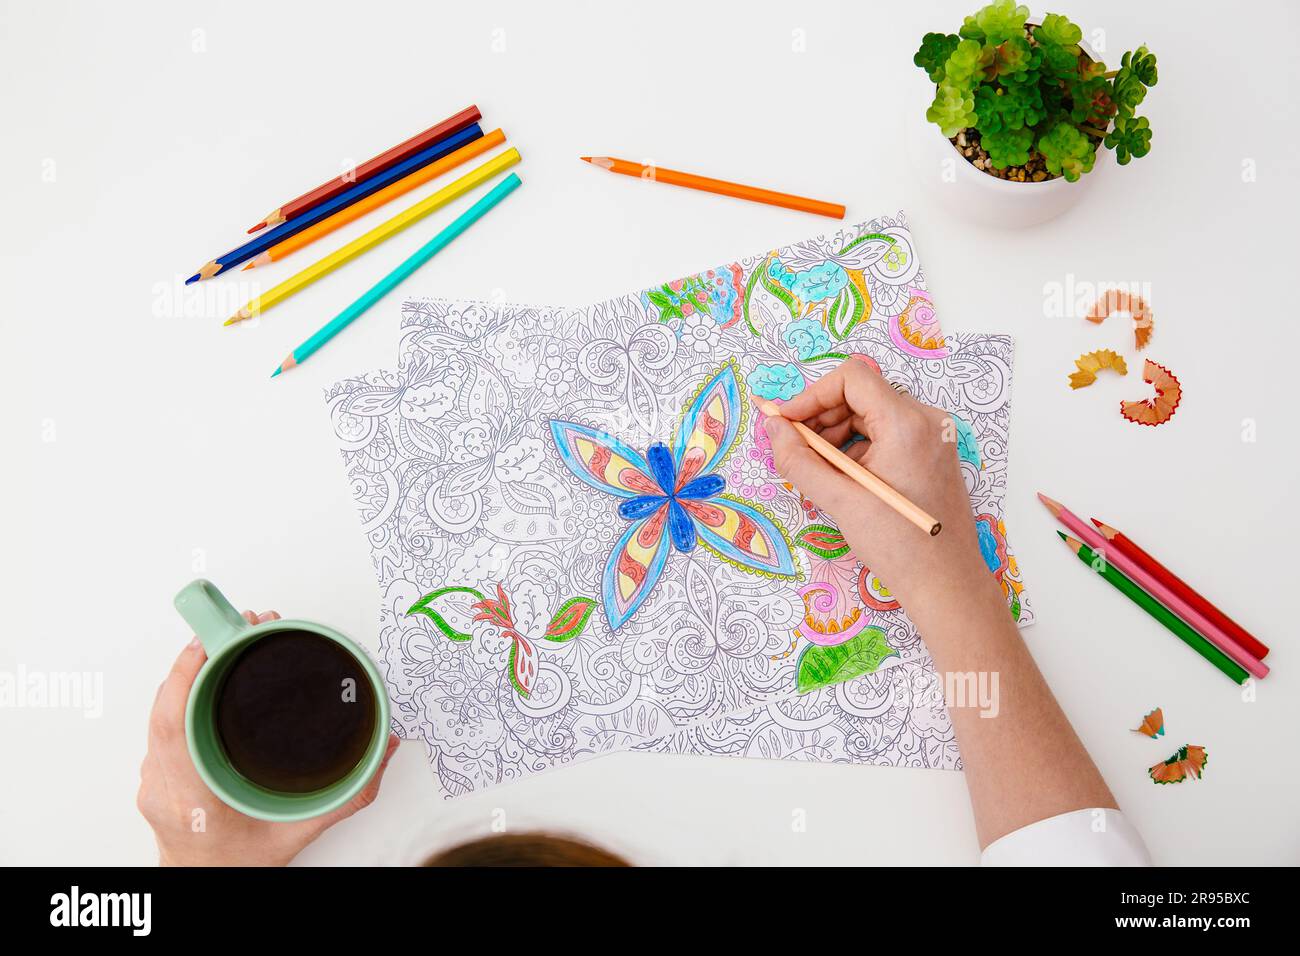 Adult coloring anti stress page or coloring book, self care and mental health, leisure option and hobby Stock Photo